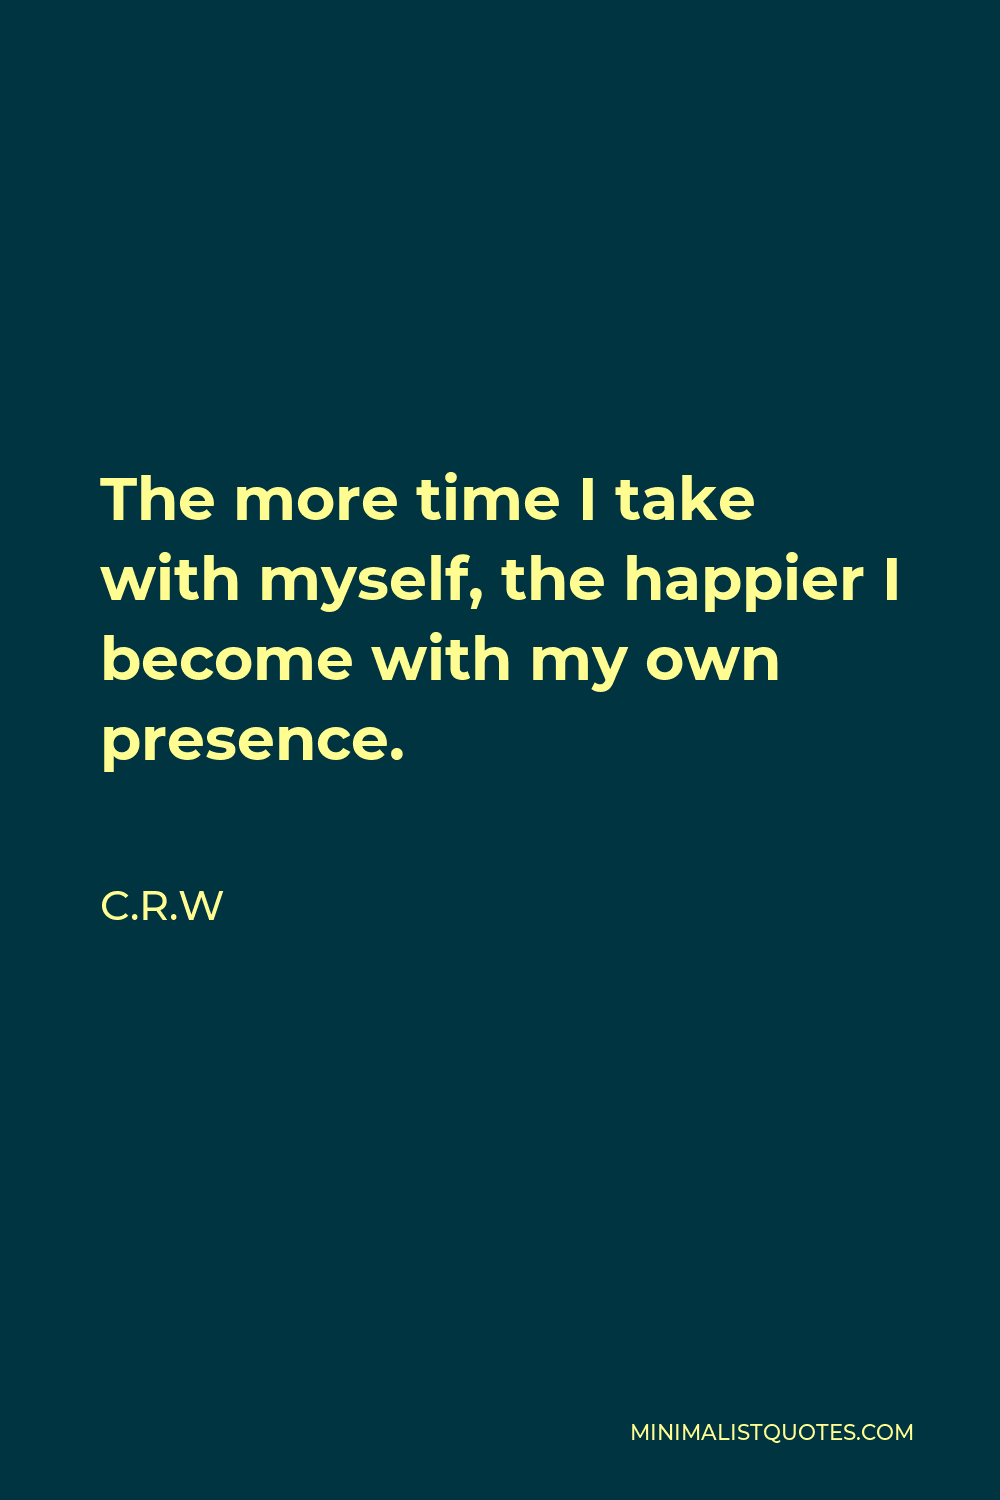 C.R.W Quote - The more time I take with myself, the happier I become with my own presence.